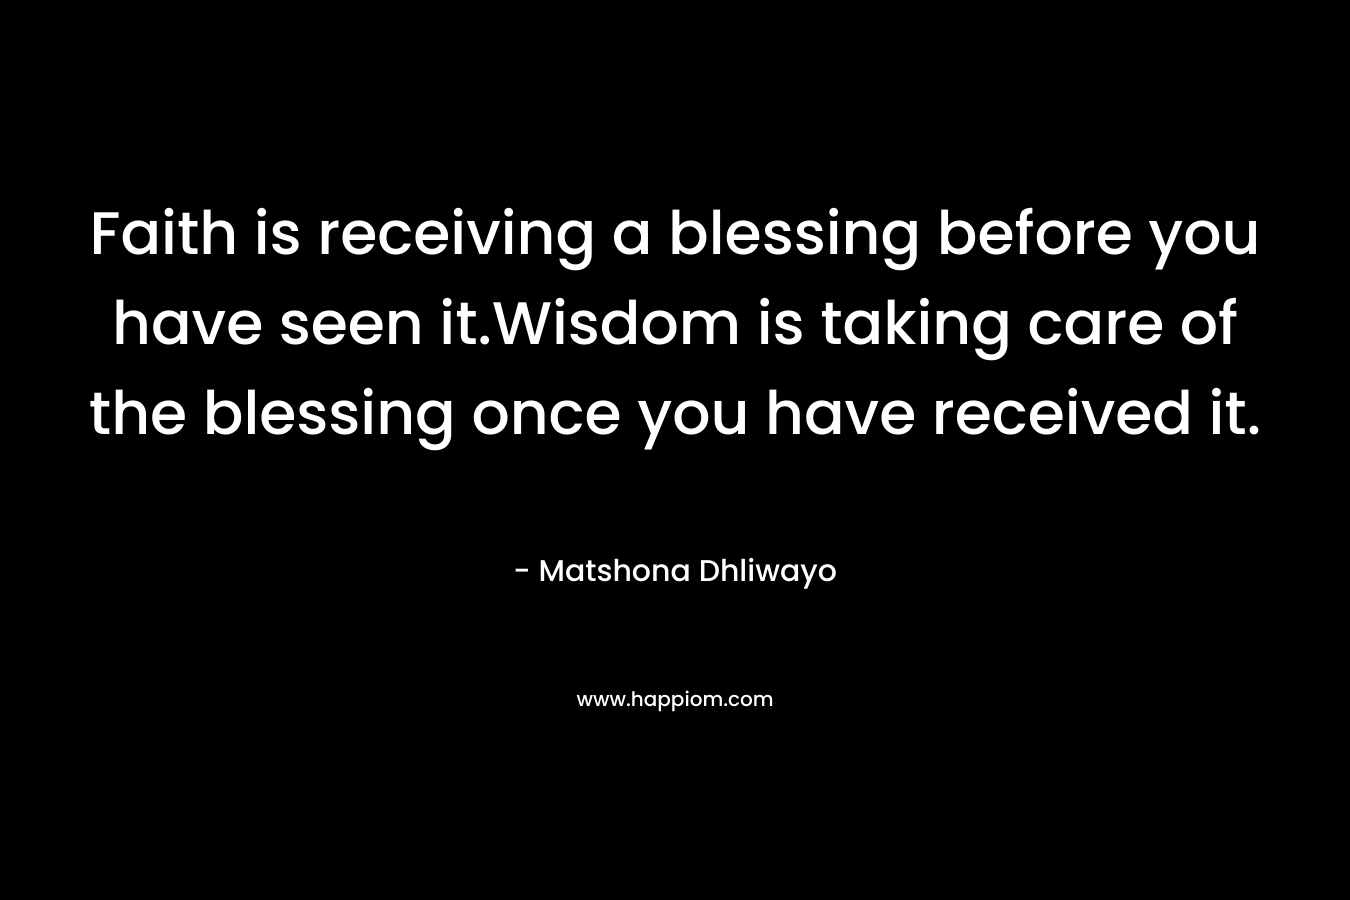 Faith is receiving a blessing before you have seen it.Wisdom is taking care of the blessing once you have received it.